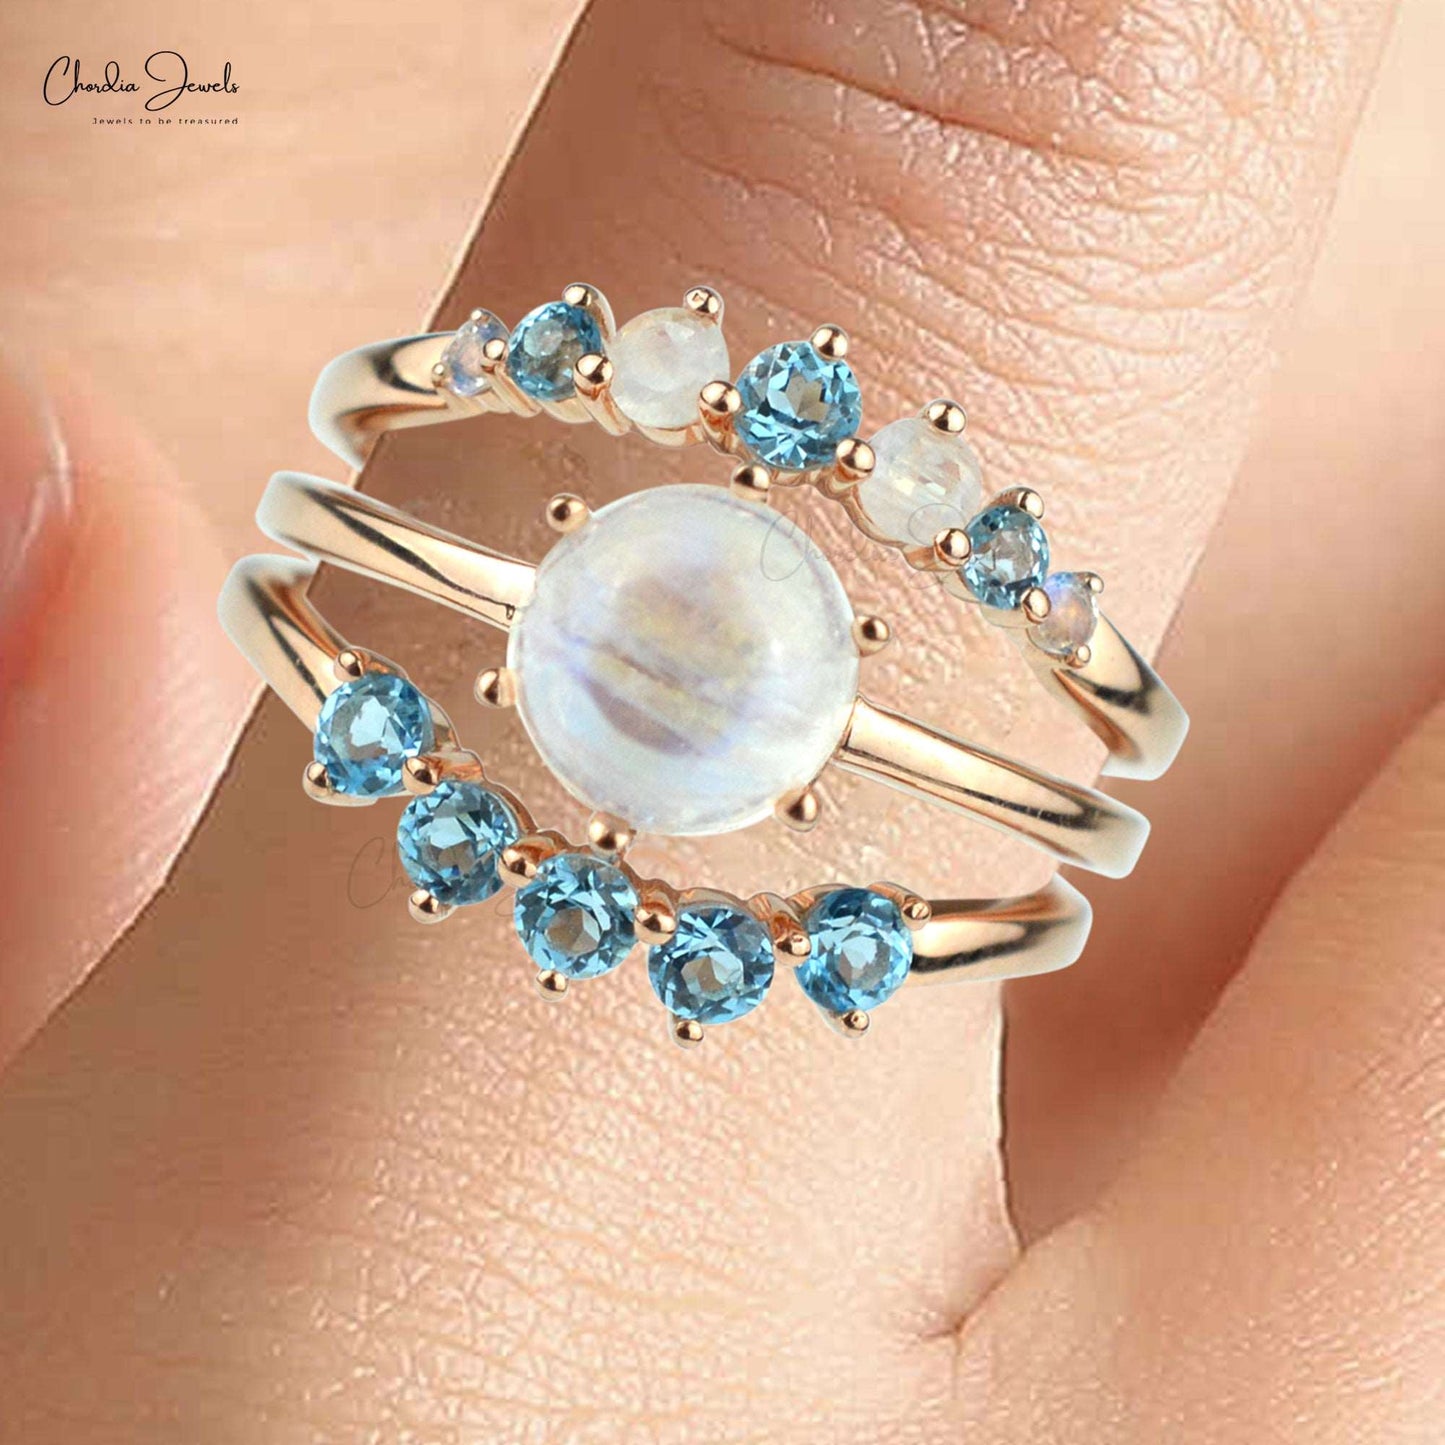 100% Natural Rainbow Moonstone With Swiss Blue Topaz Ring Round Stackable Gemstone Engagement Ring in 925 Sterling Silver At Wholesale Price